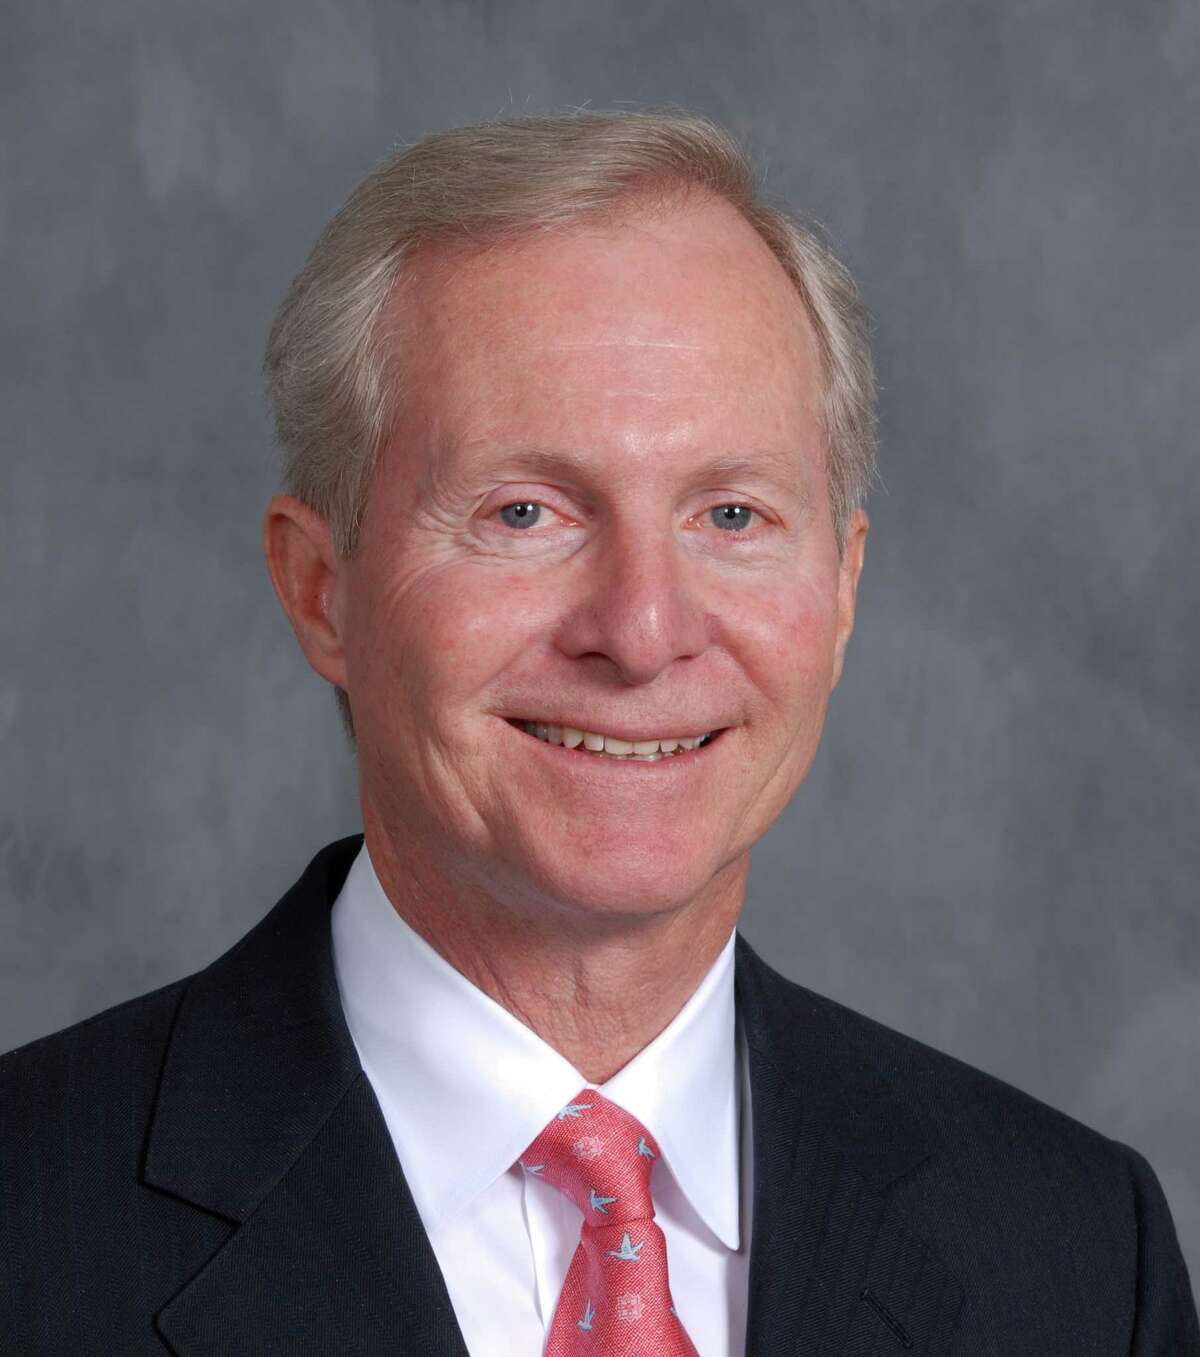 John Walker, CEO of Houston oil and gas company EnerVest